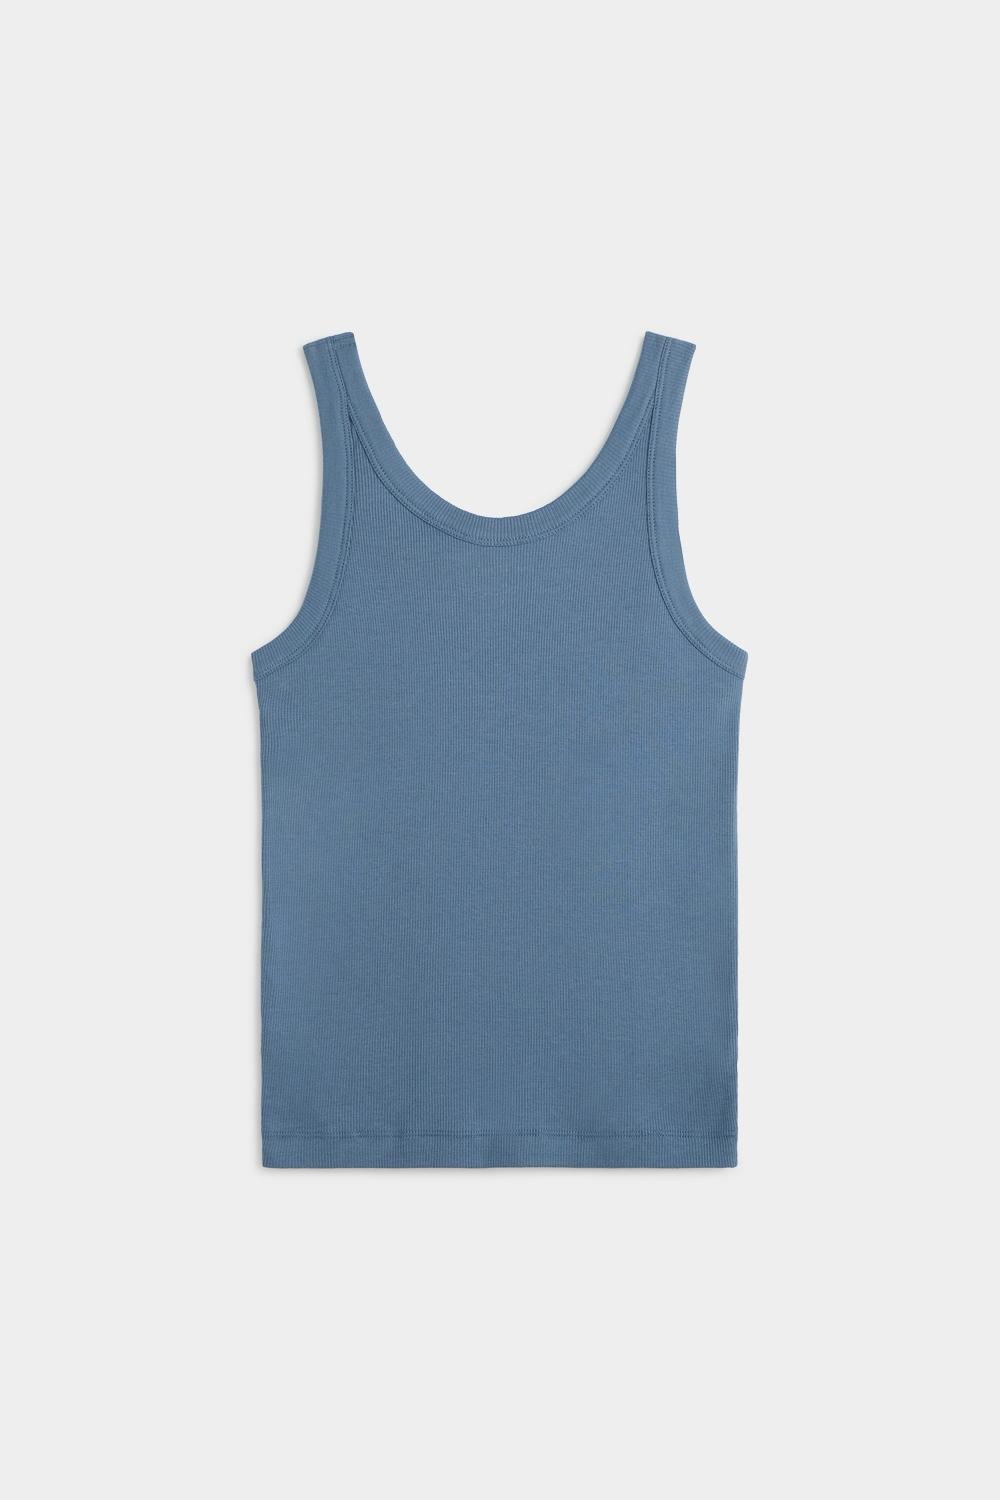 Image of 1- Tank top blue